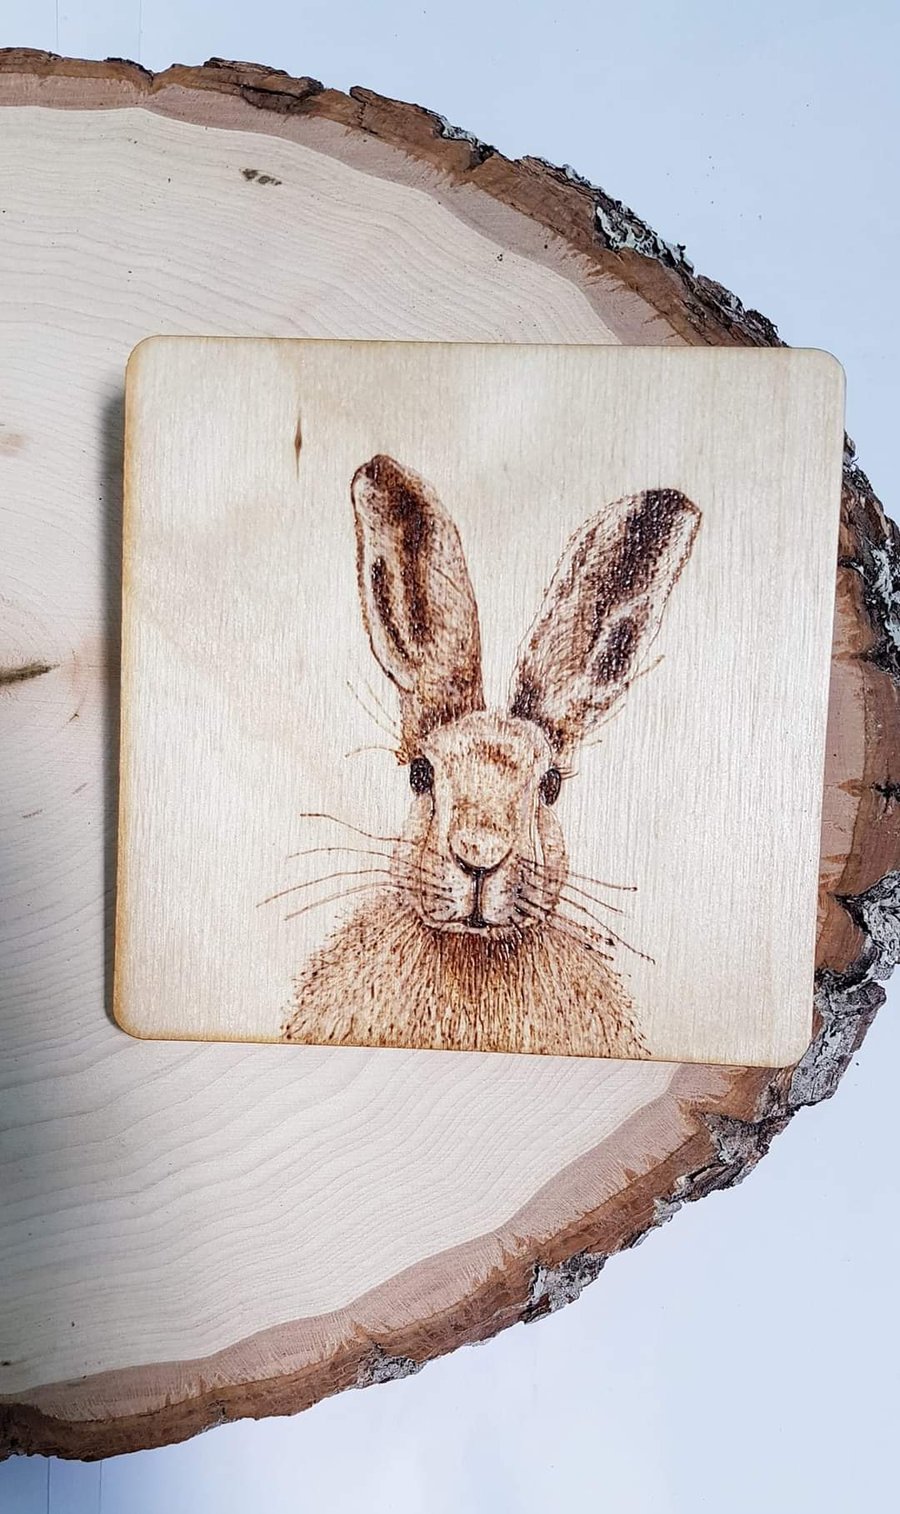 Hand Burned Wooden Coaster - Hare